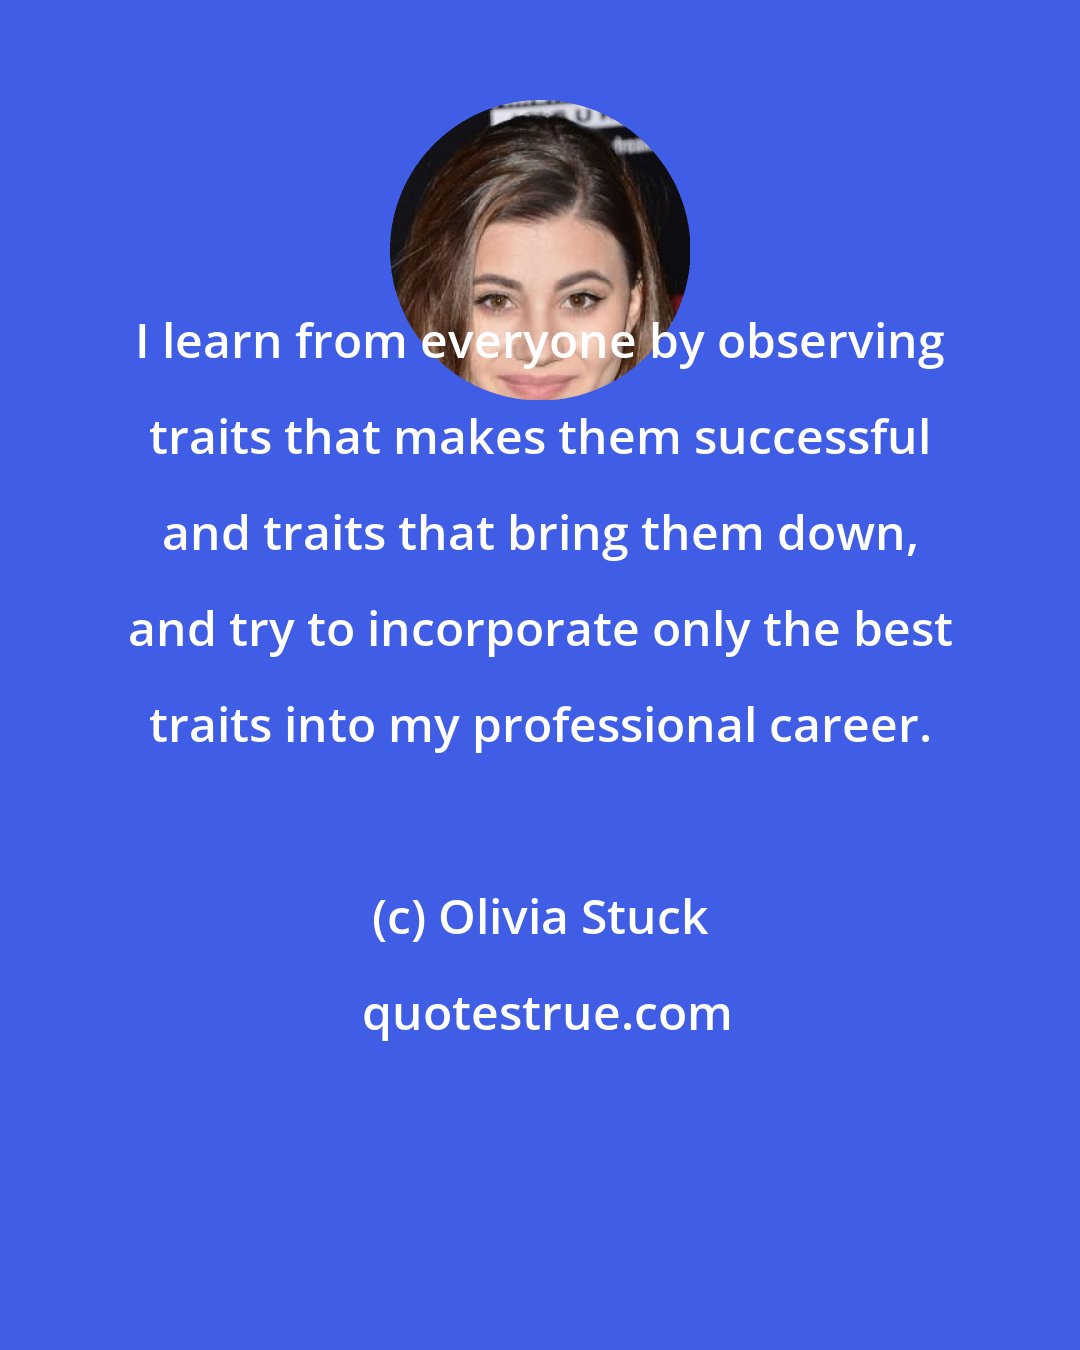 Olivia Stuck: I learn from everyone by observing traits that makes them successful and traits that bring them down, and try to incorporate only the best traits into my professional career.